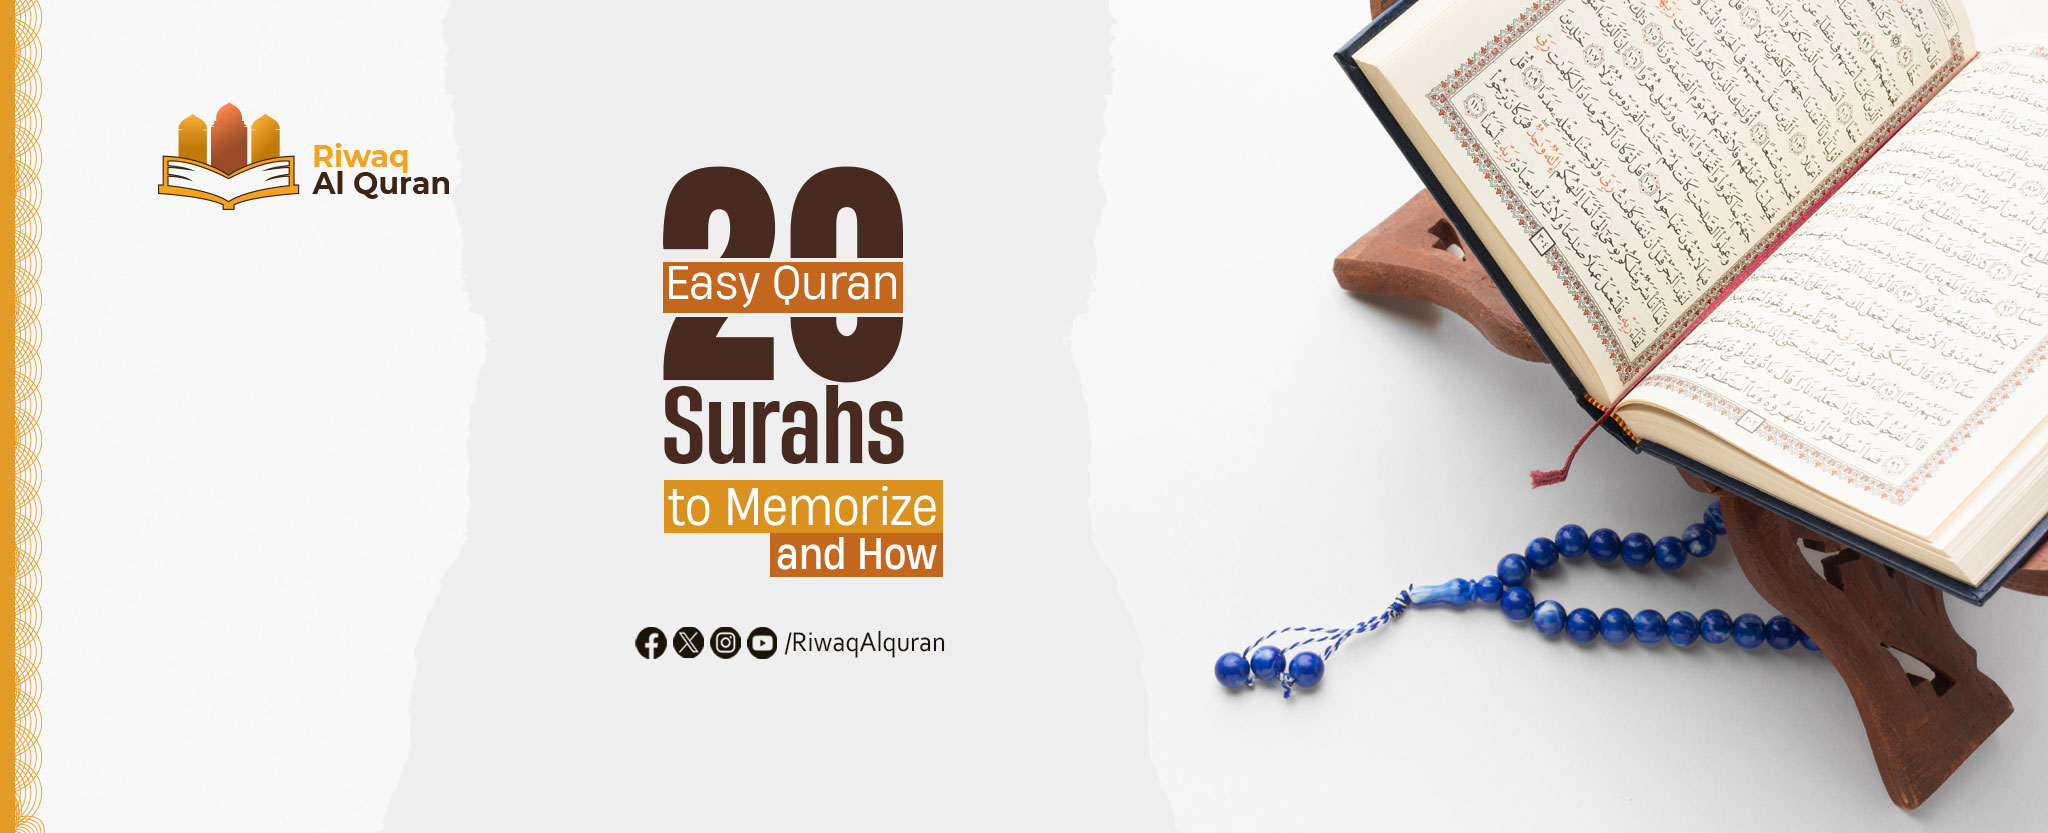 20 Easy Quran Surahs to Memorize and How!